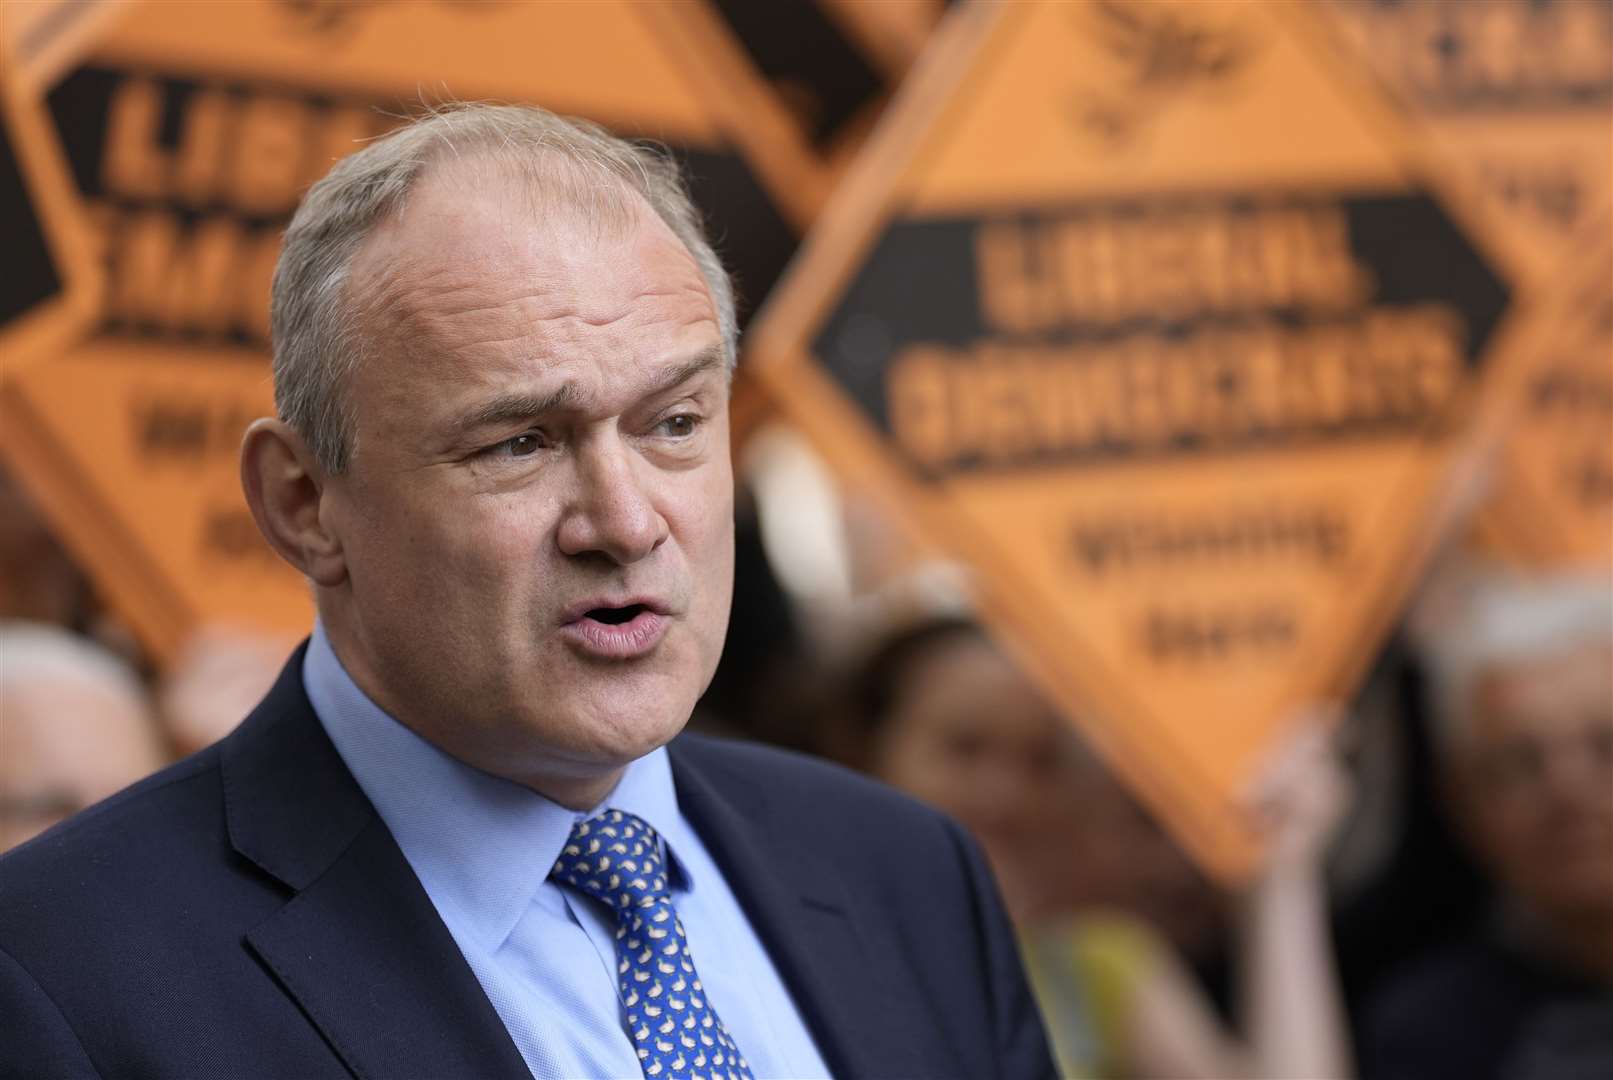 Liberal Democrat leader Sir Ed Davey will be back on the campaign trail (Andrew Matthews/PA)